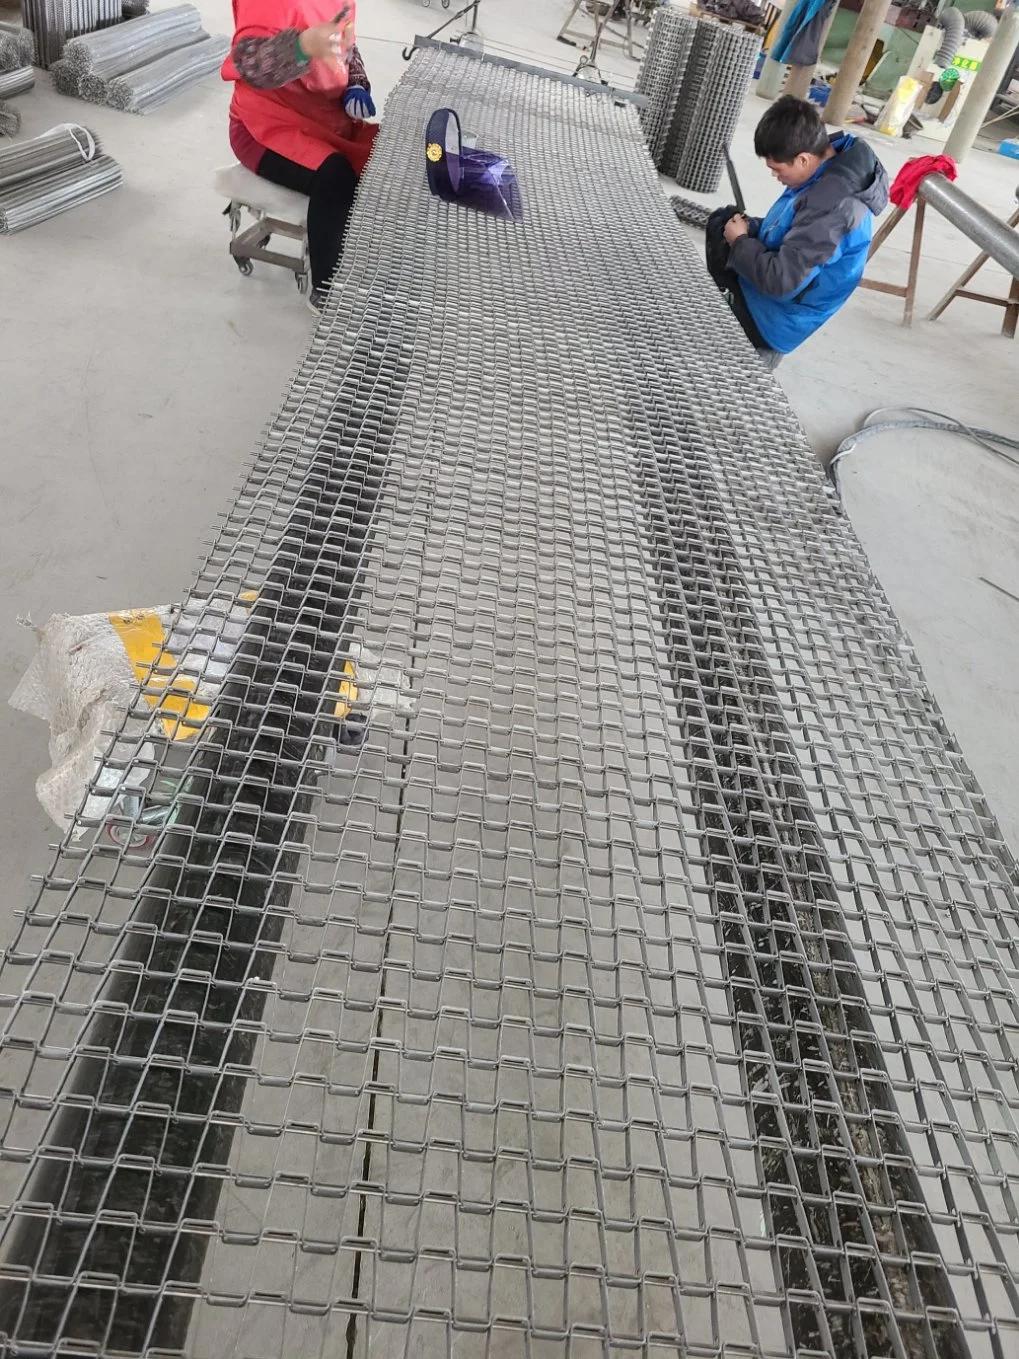 Food Grade Stainless Steel Honeycomb Wire Mesh Conveyor Belt for Food Cooling and Freezing